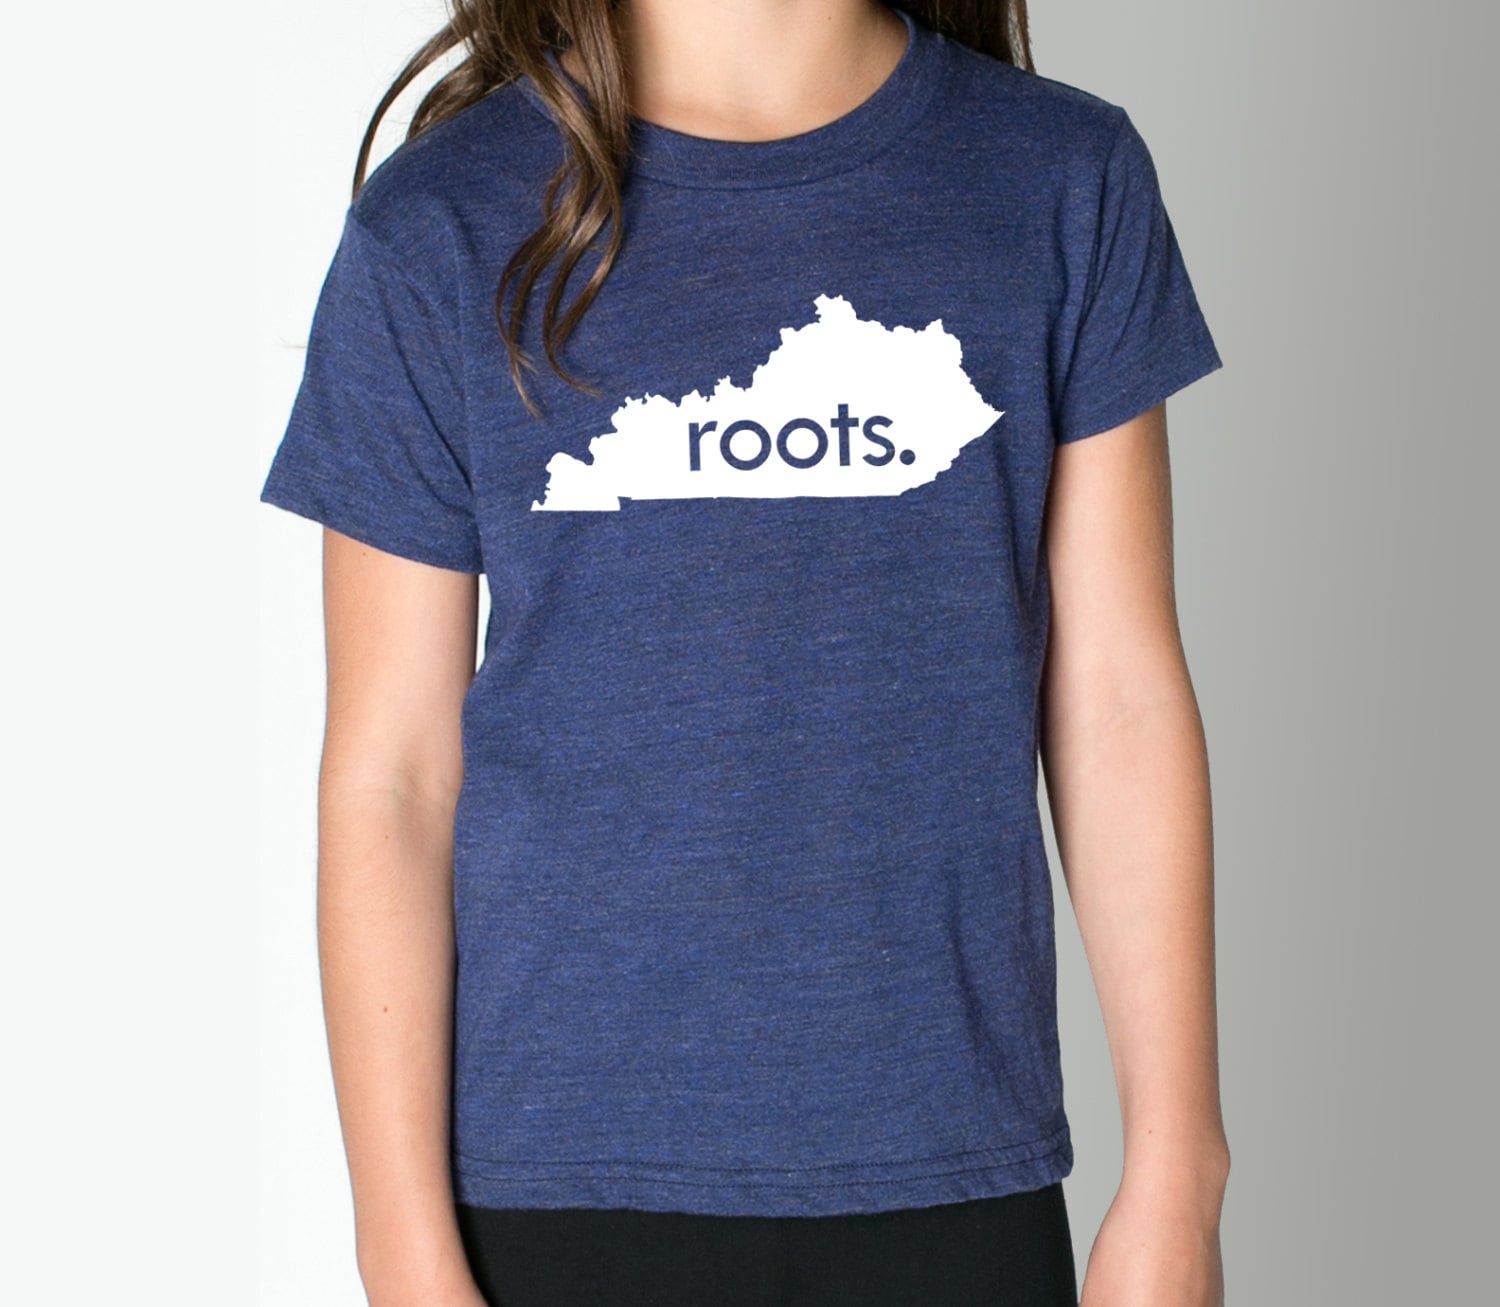 Kentucky "Roots' Or "Made' Tri Blend Toddler, Kids, Youth Track T-Shirt - Sizes 2T, 4T, 6, 8, 10, 12